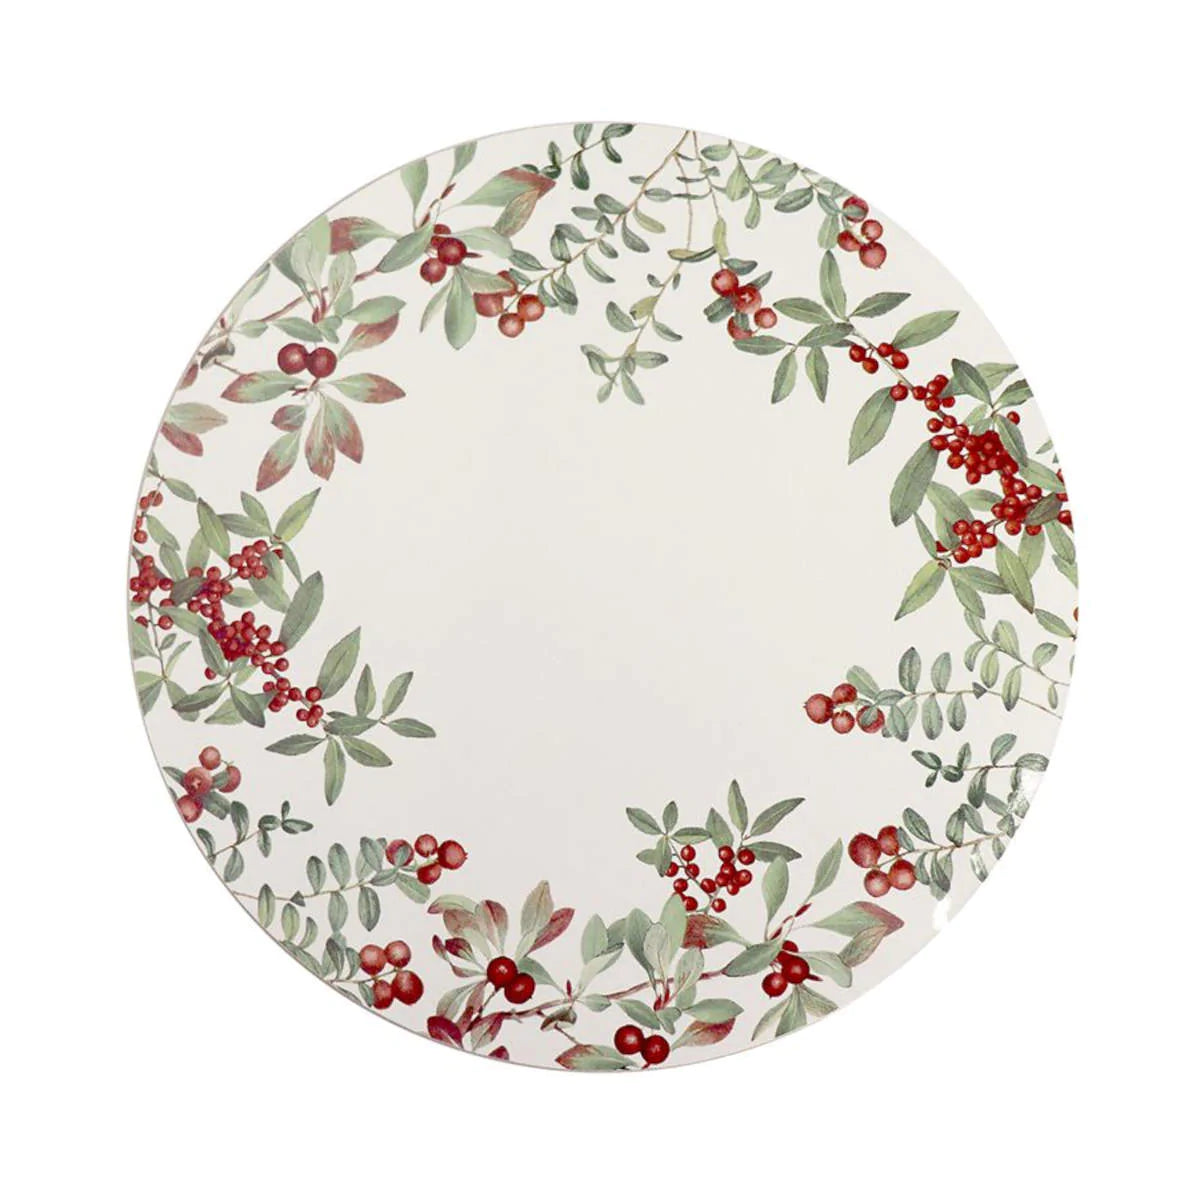 Festive Berry Round Placemat Set of 4